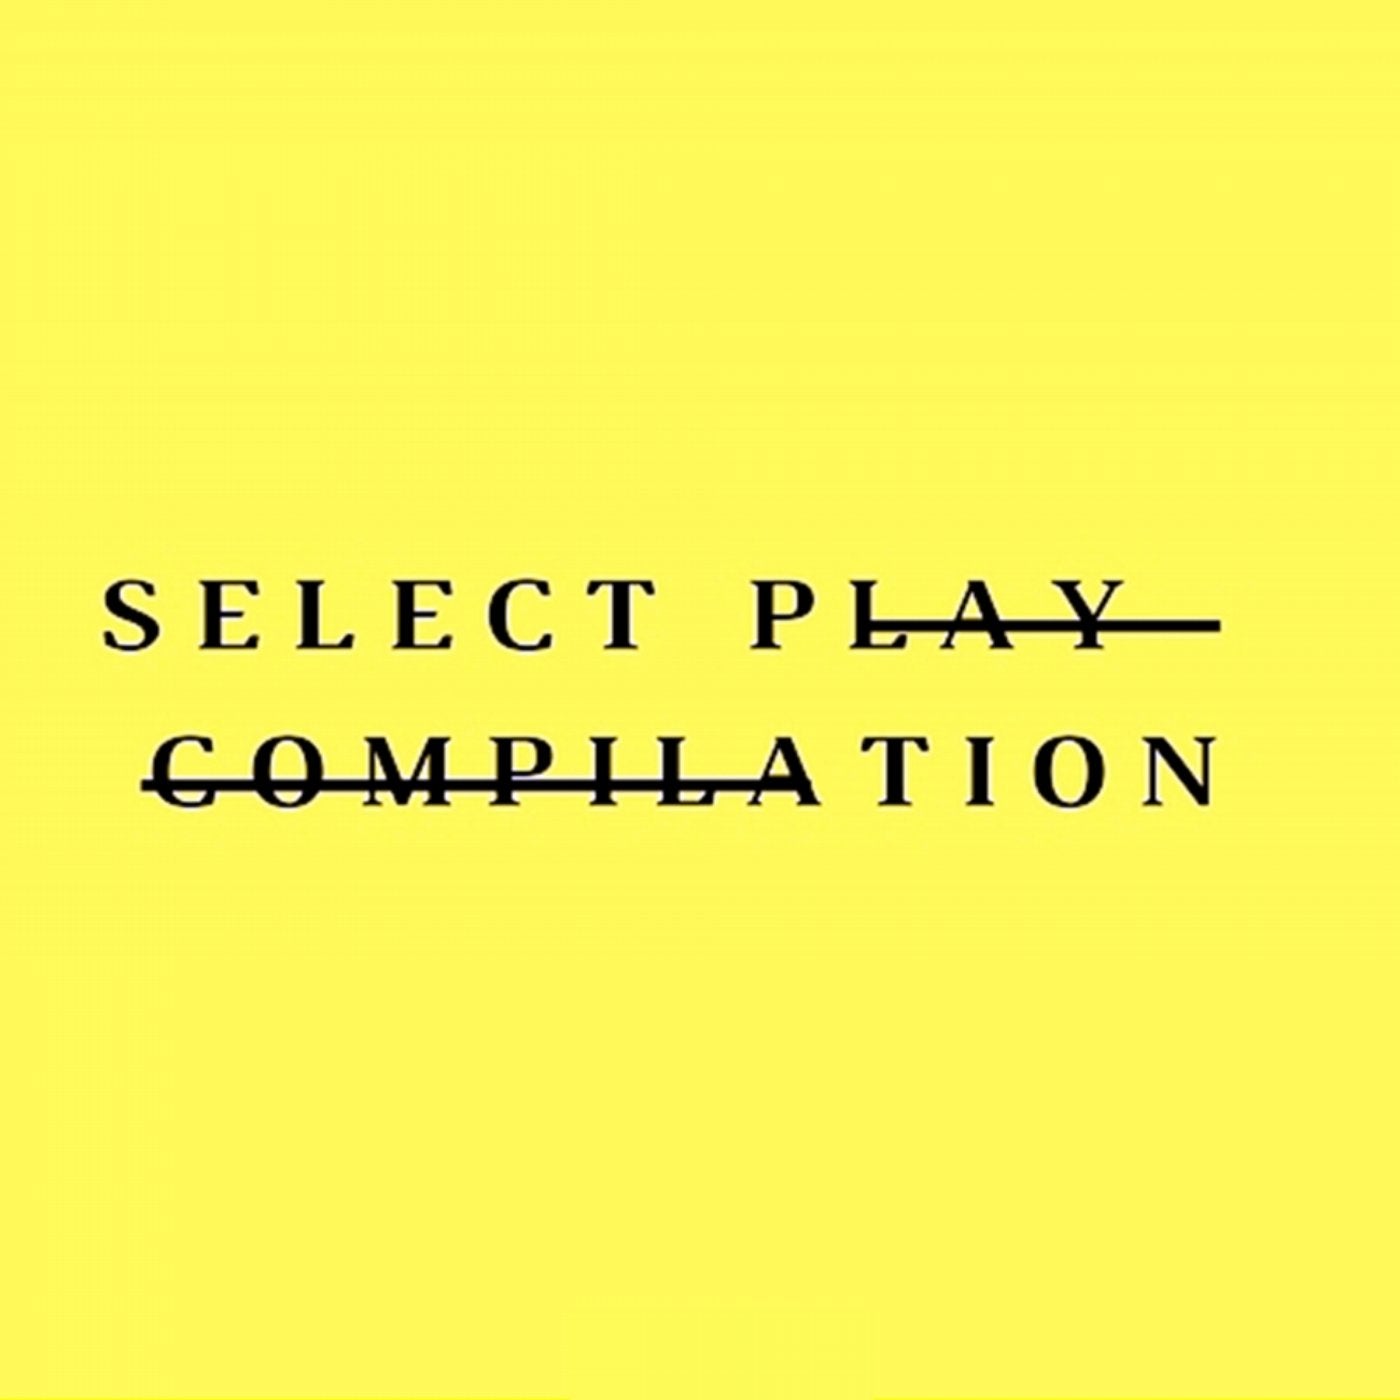 Select Play Compilation